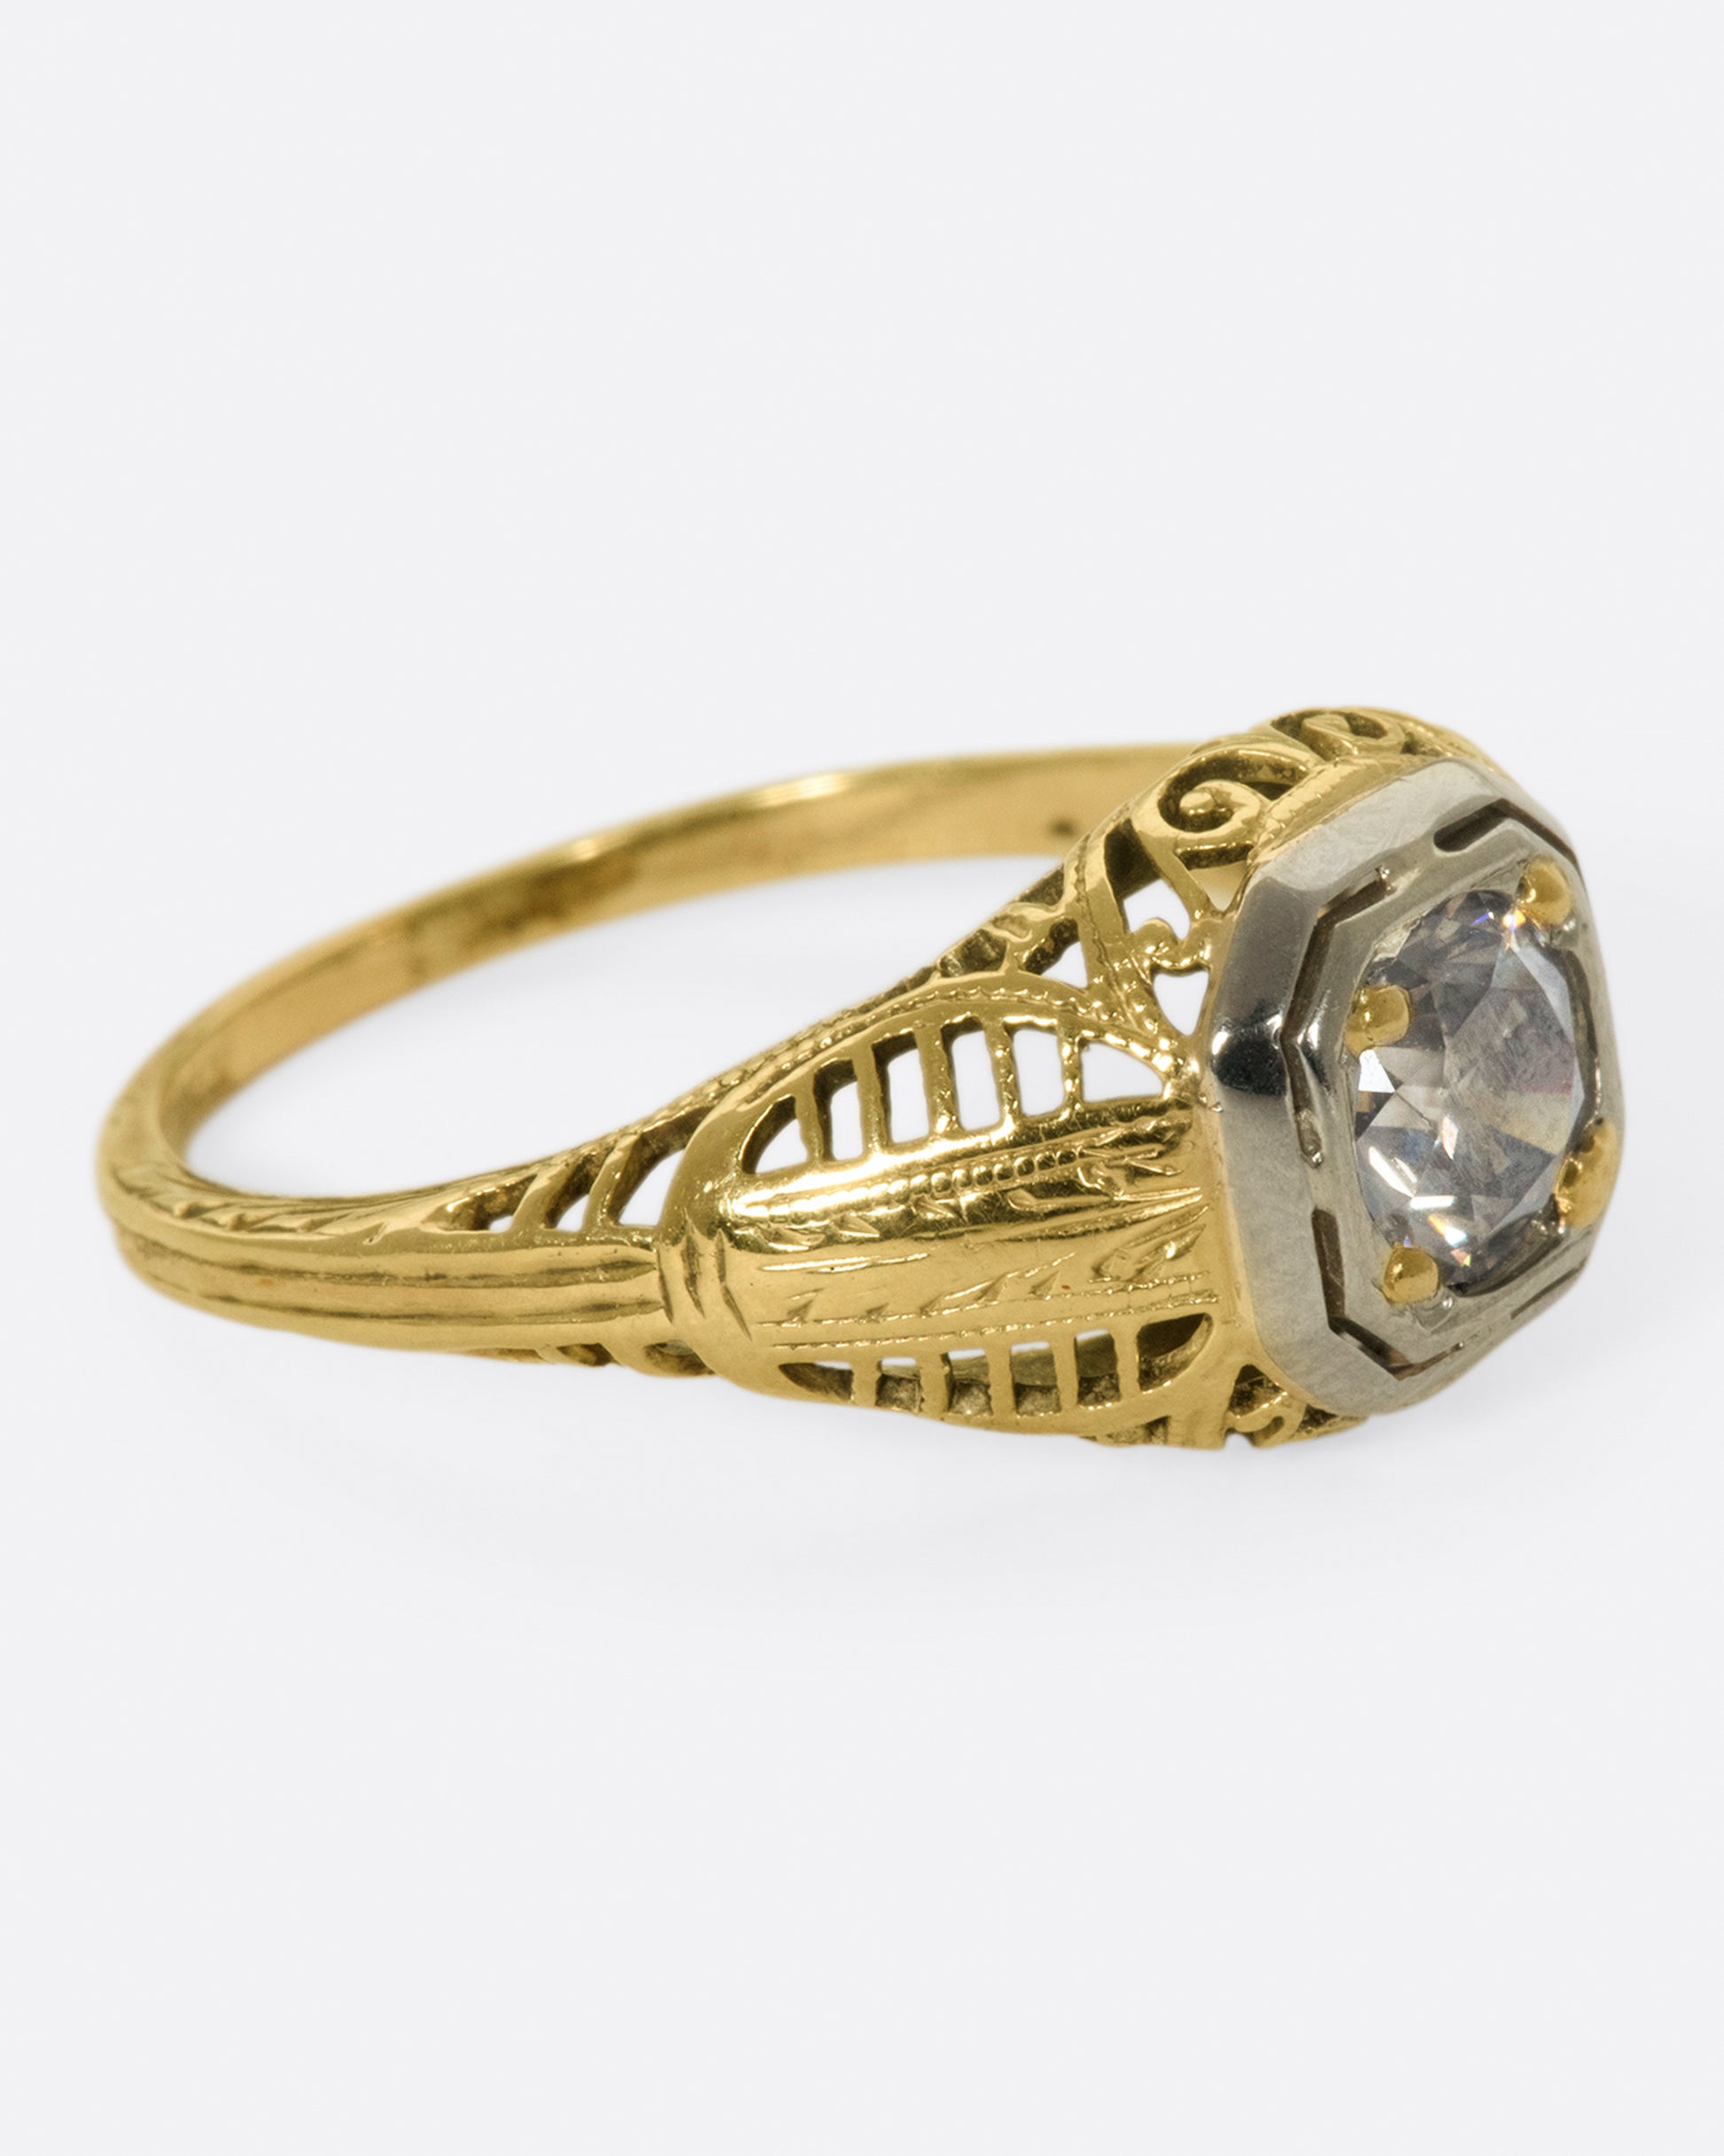 A filigree-covered signet ring with a champagne diamond at its center, set in a white gold bezel.